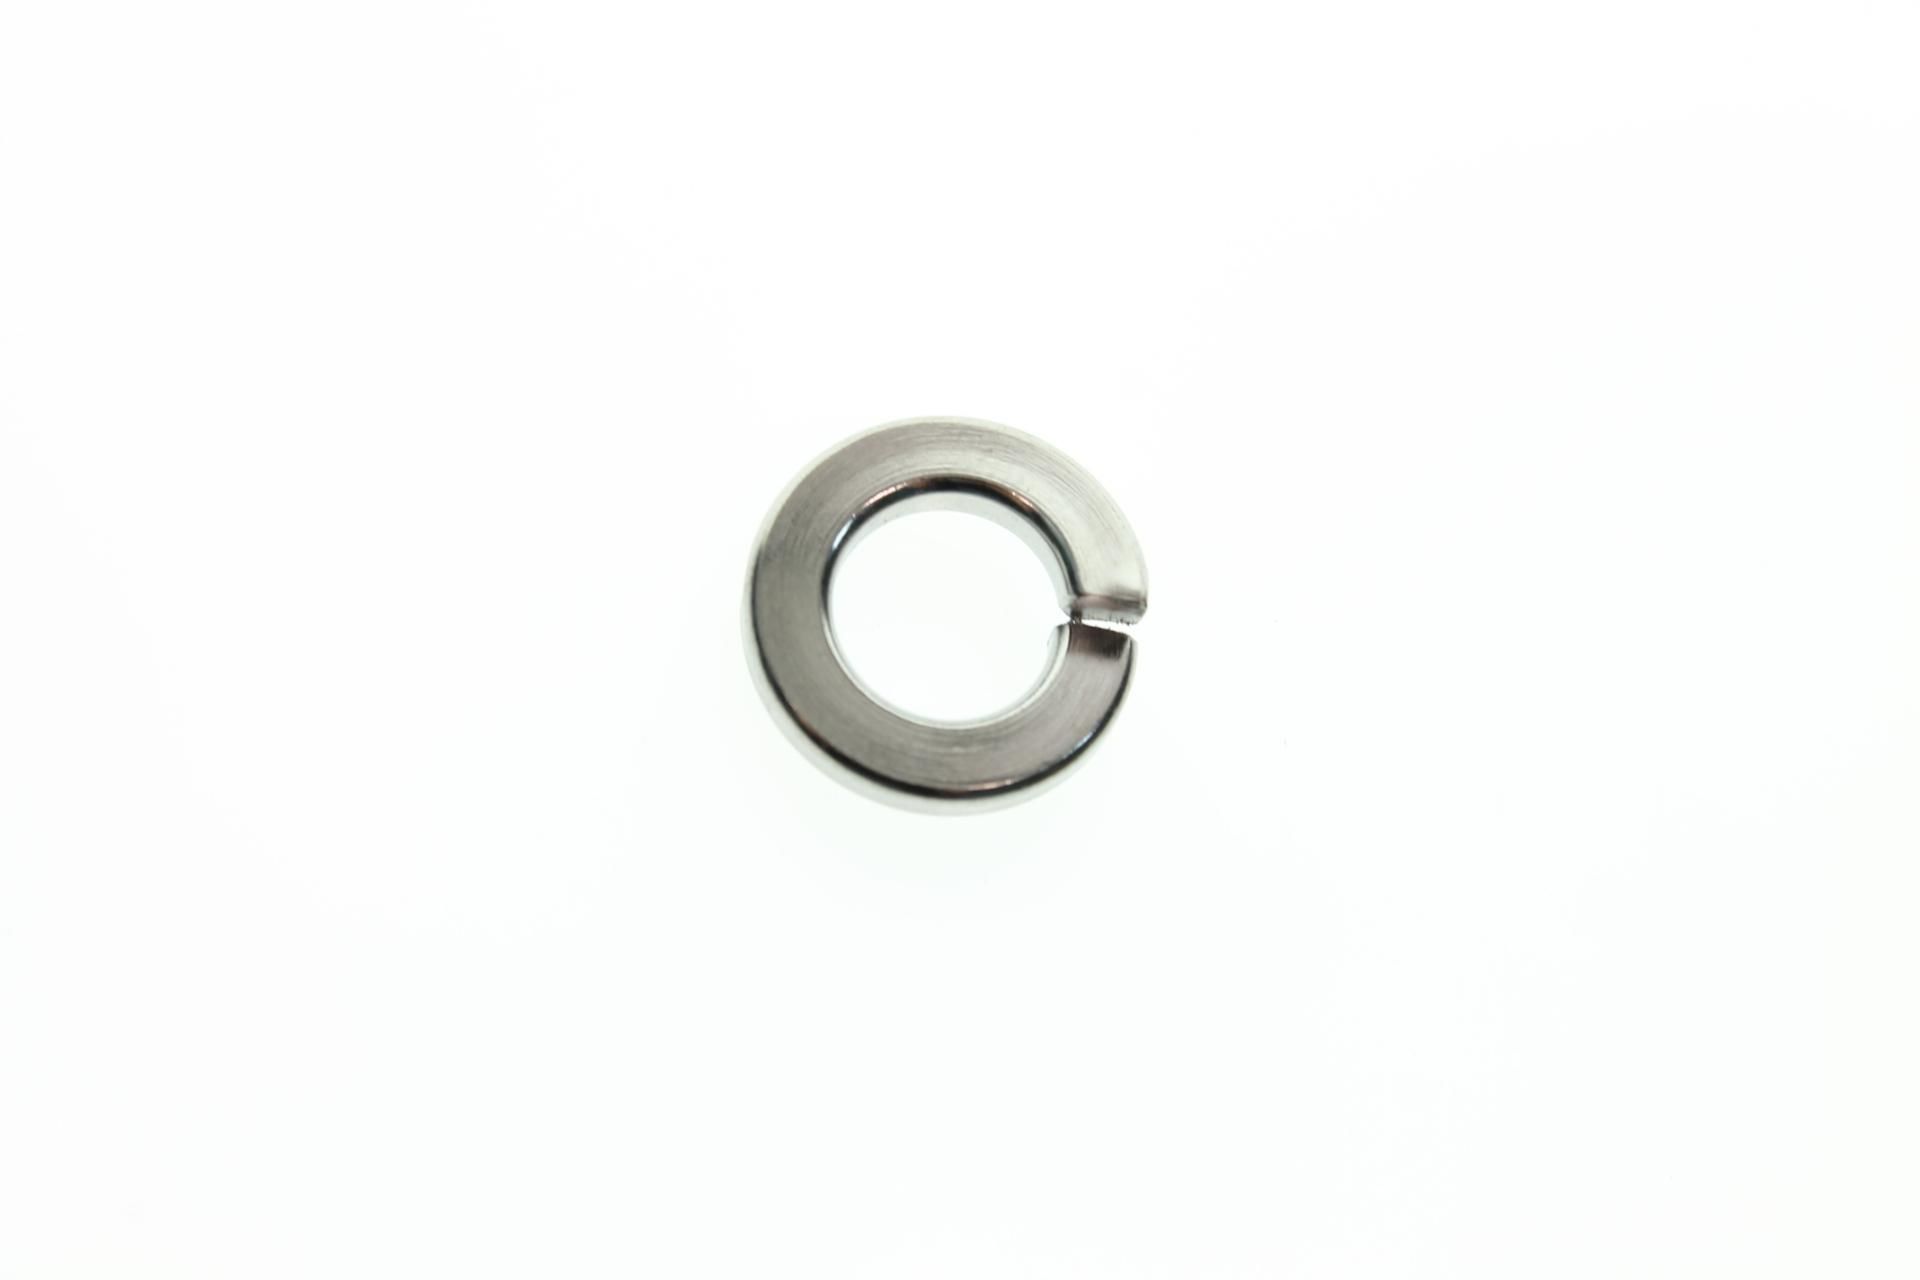 08321-21089 Superseded by 08321-01087 - LOCK WASHER